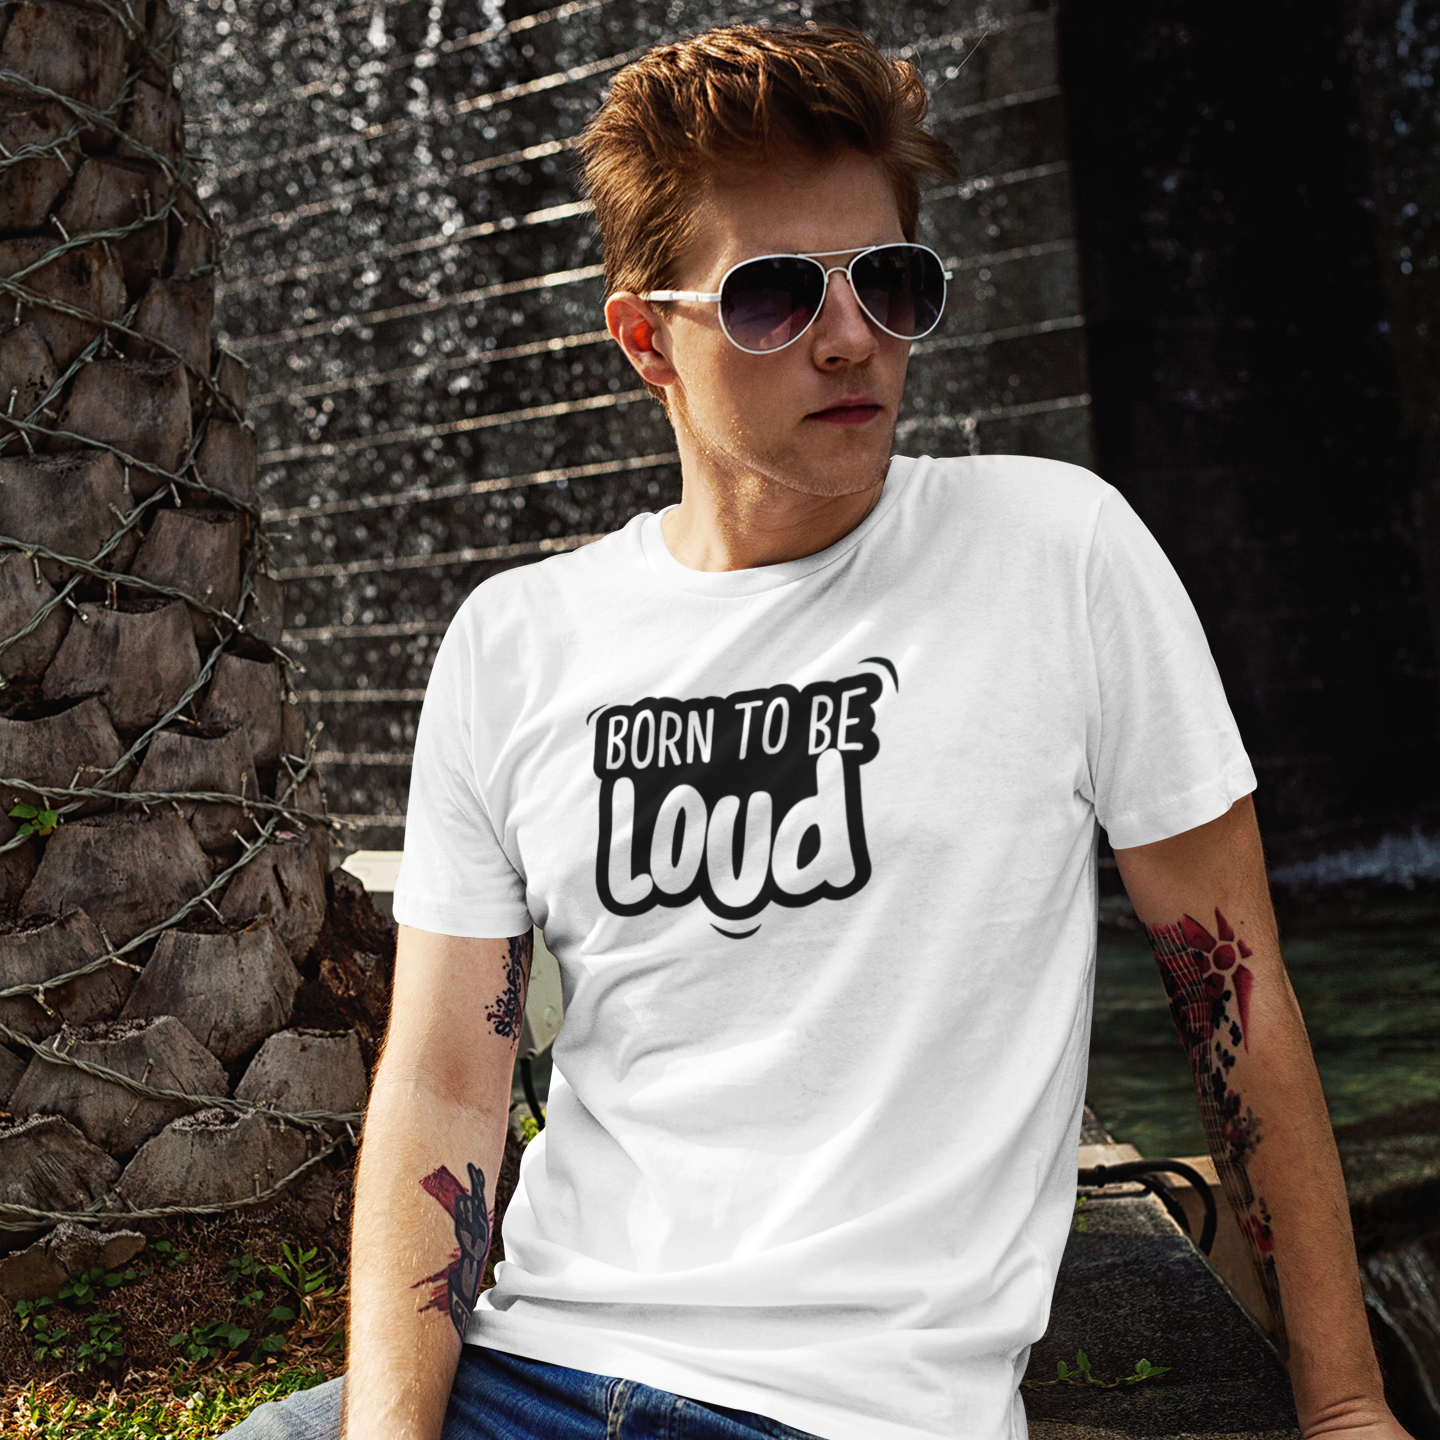 'Born to be loud' adult shirt